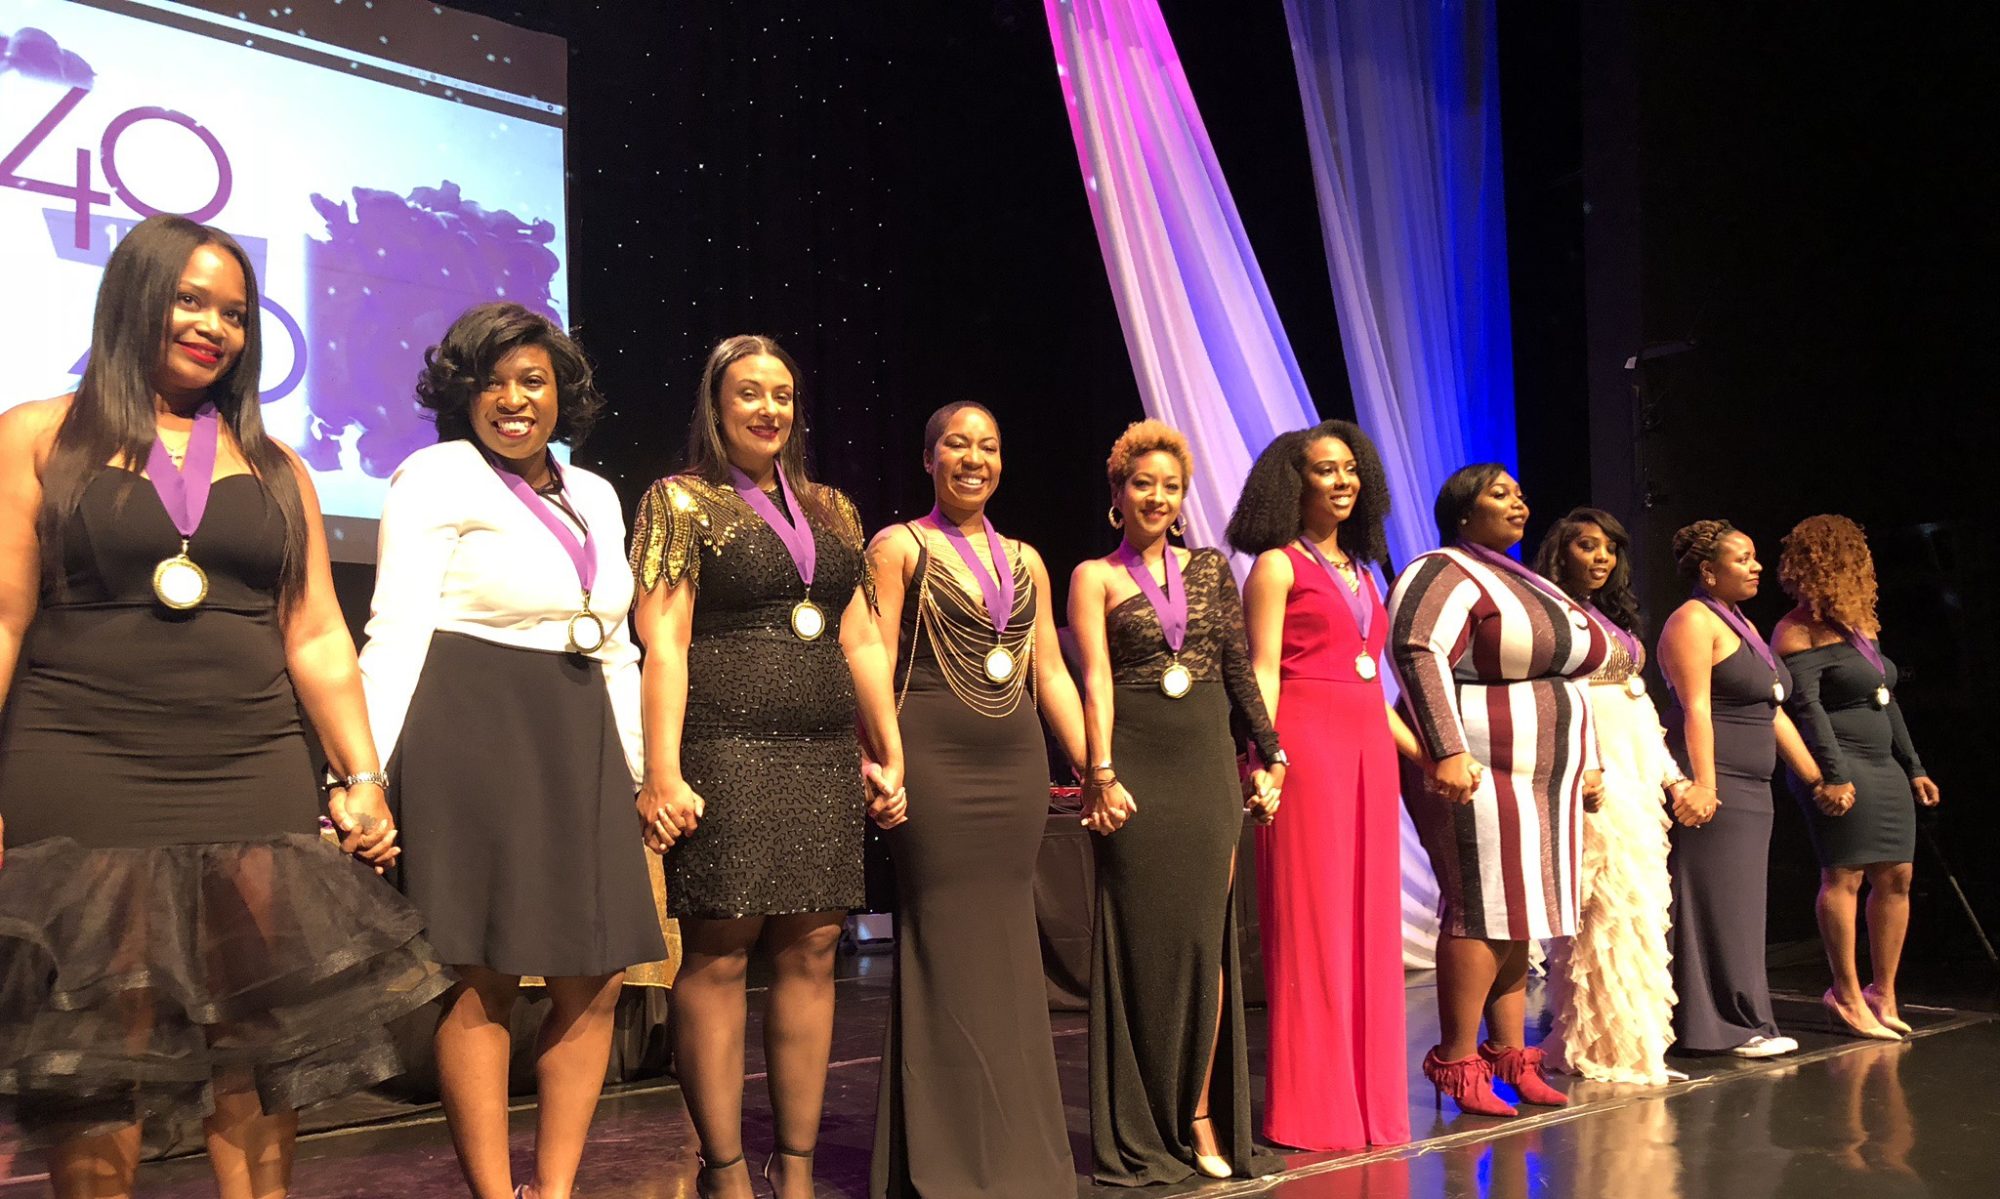 Young Women Professionals League 40 Under 40 Awards 